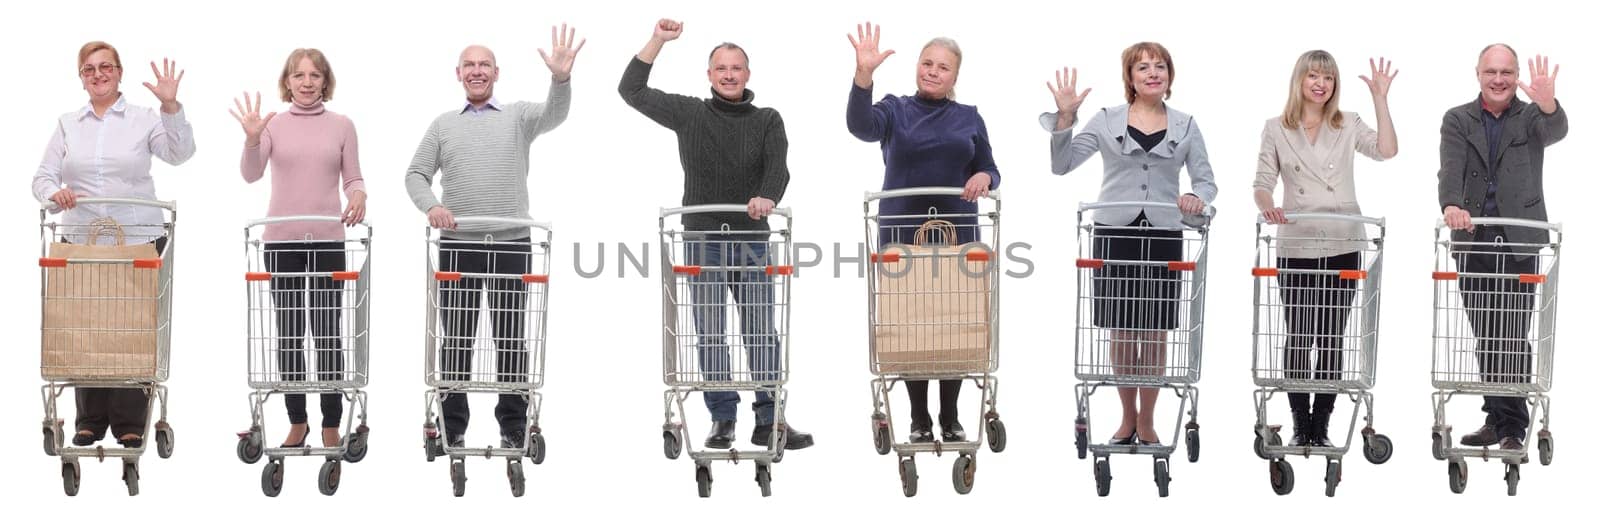 group of people with shopping cart showing thumbs up at camera by asdf